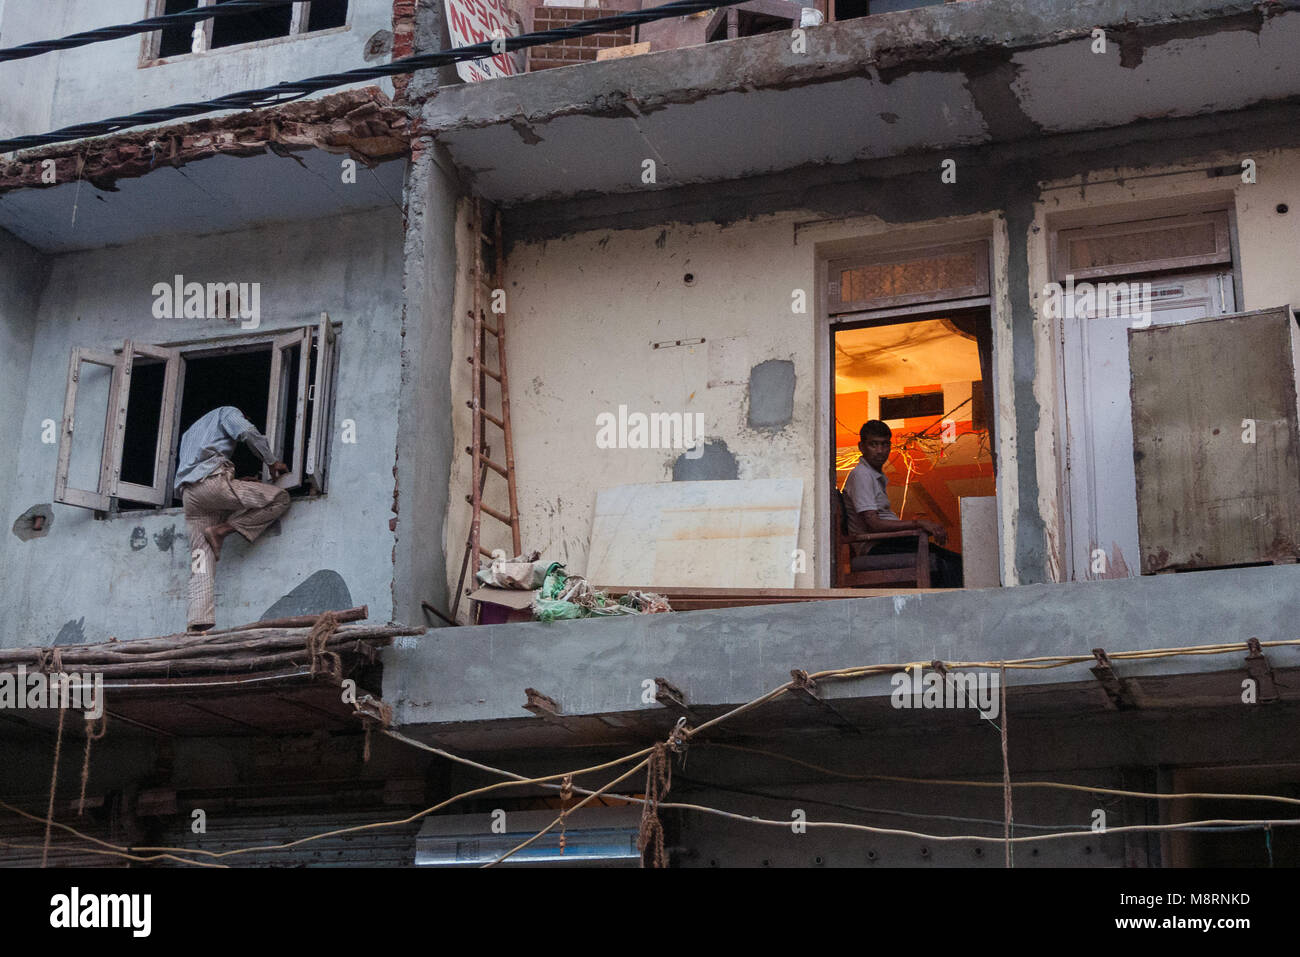 New Delhi, India:In a building under renovation in the Sadar Bazar, a man tries to enter through the window while another works in his office. Stock Photo